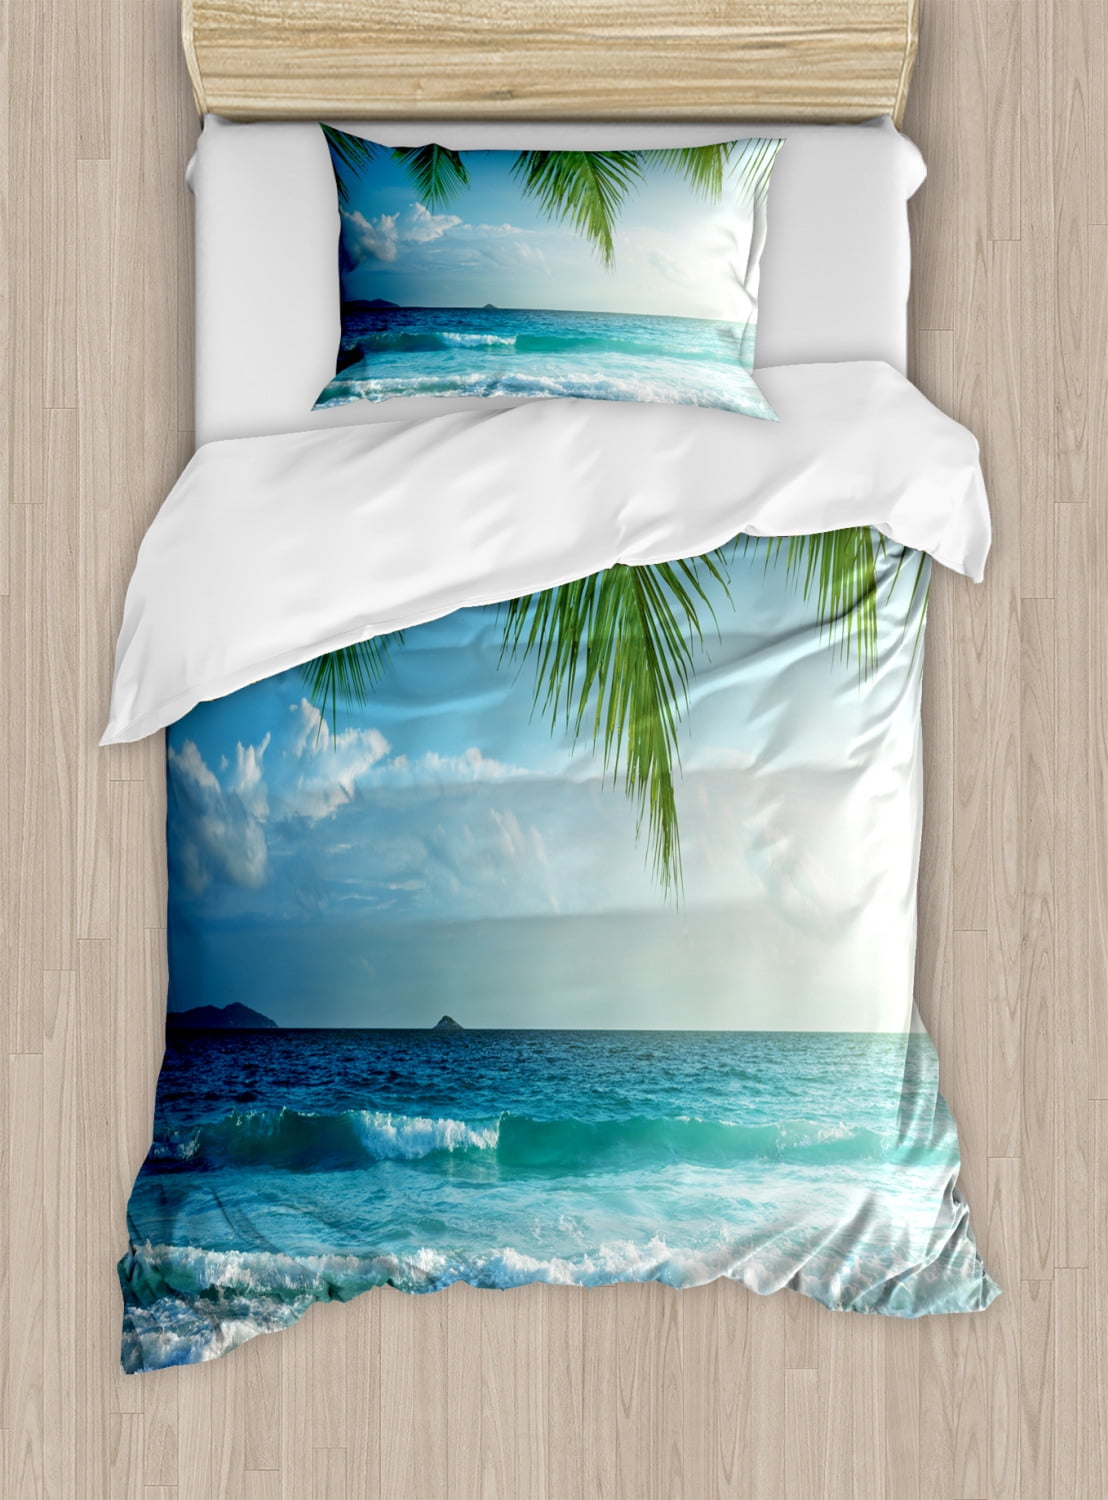 20*30 inches Pillowcases Set of 2 3D Seaside Beach Wave Sunset Queen Size 